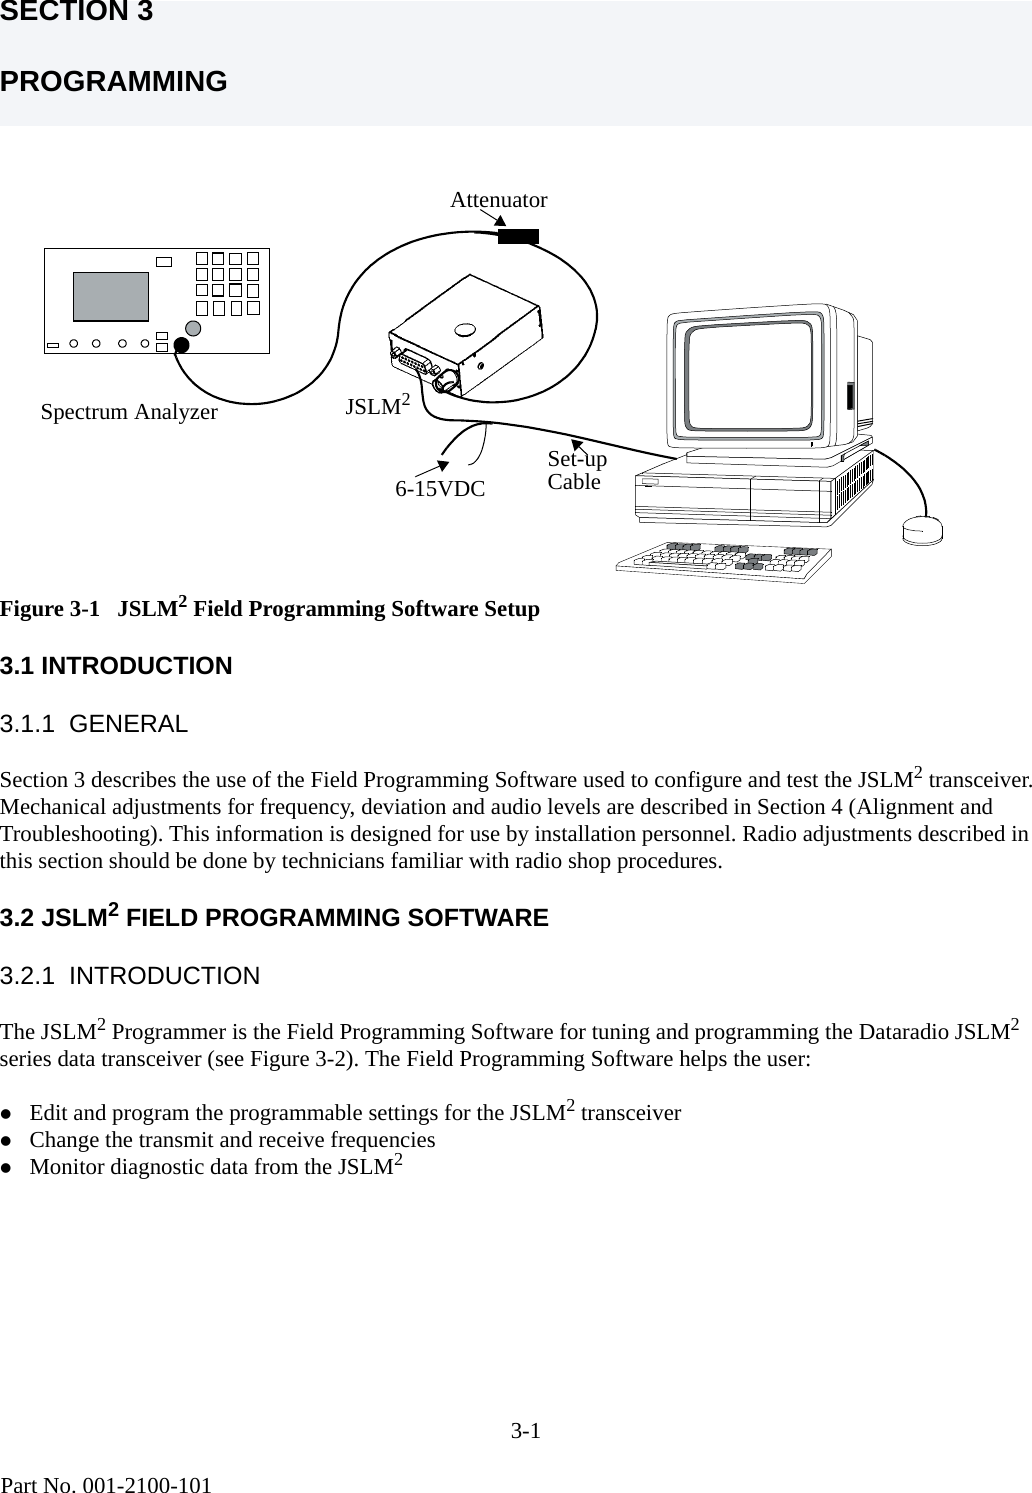 3-1                                           Part No. 001-2100-101SECTION 3PROGRAMMINGFigure 3-1   JSLM2 Field Programming Software Setup3.1 INTRODUCTION3.1.1  GENERALSection 3 describes the use of the Field Programming Software used to configure and test the JSLM2 transceiver. Mechanical adjustments for frequency, deviation and audio levels are described in Section 4 (Alignment and Troubleshooting). This information is designed for use by installation personnel. Radio adjustments described in this section should be done by technicians familiar with radio shop procedures.3.2 JSLM2 FIELD PROGRAMMING SOFTWARE3.2.1  INTRODUCTIONThe JSLM2 Programmer is the Field Programming Software for tuning and programming the Dataradio JSLM2 series data transceiver (see Figure 3-2). The Field Programming Software helps the user:zEdit and program the programmable settings for the JSLM2 transceiverzChange the transmit and receive frequencieszMonitor diagnostic data from the JSLM2AttenuatorSet-upCable JSLM26-15VDCSpectrum Analyzer